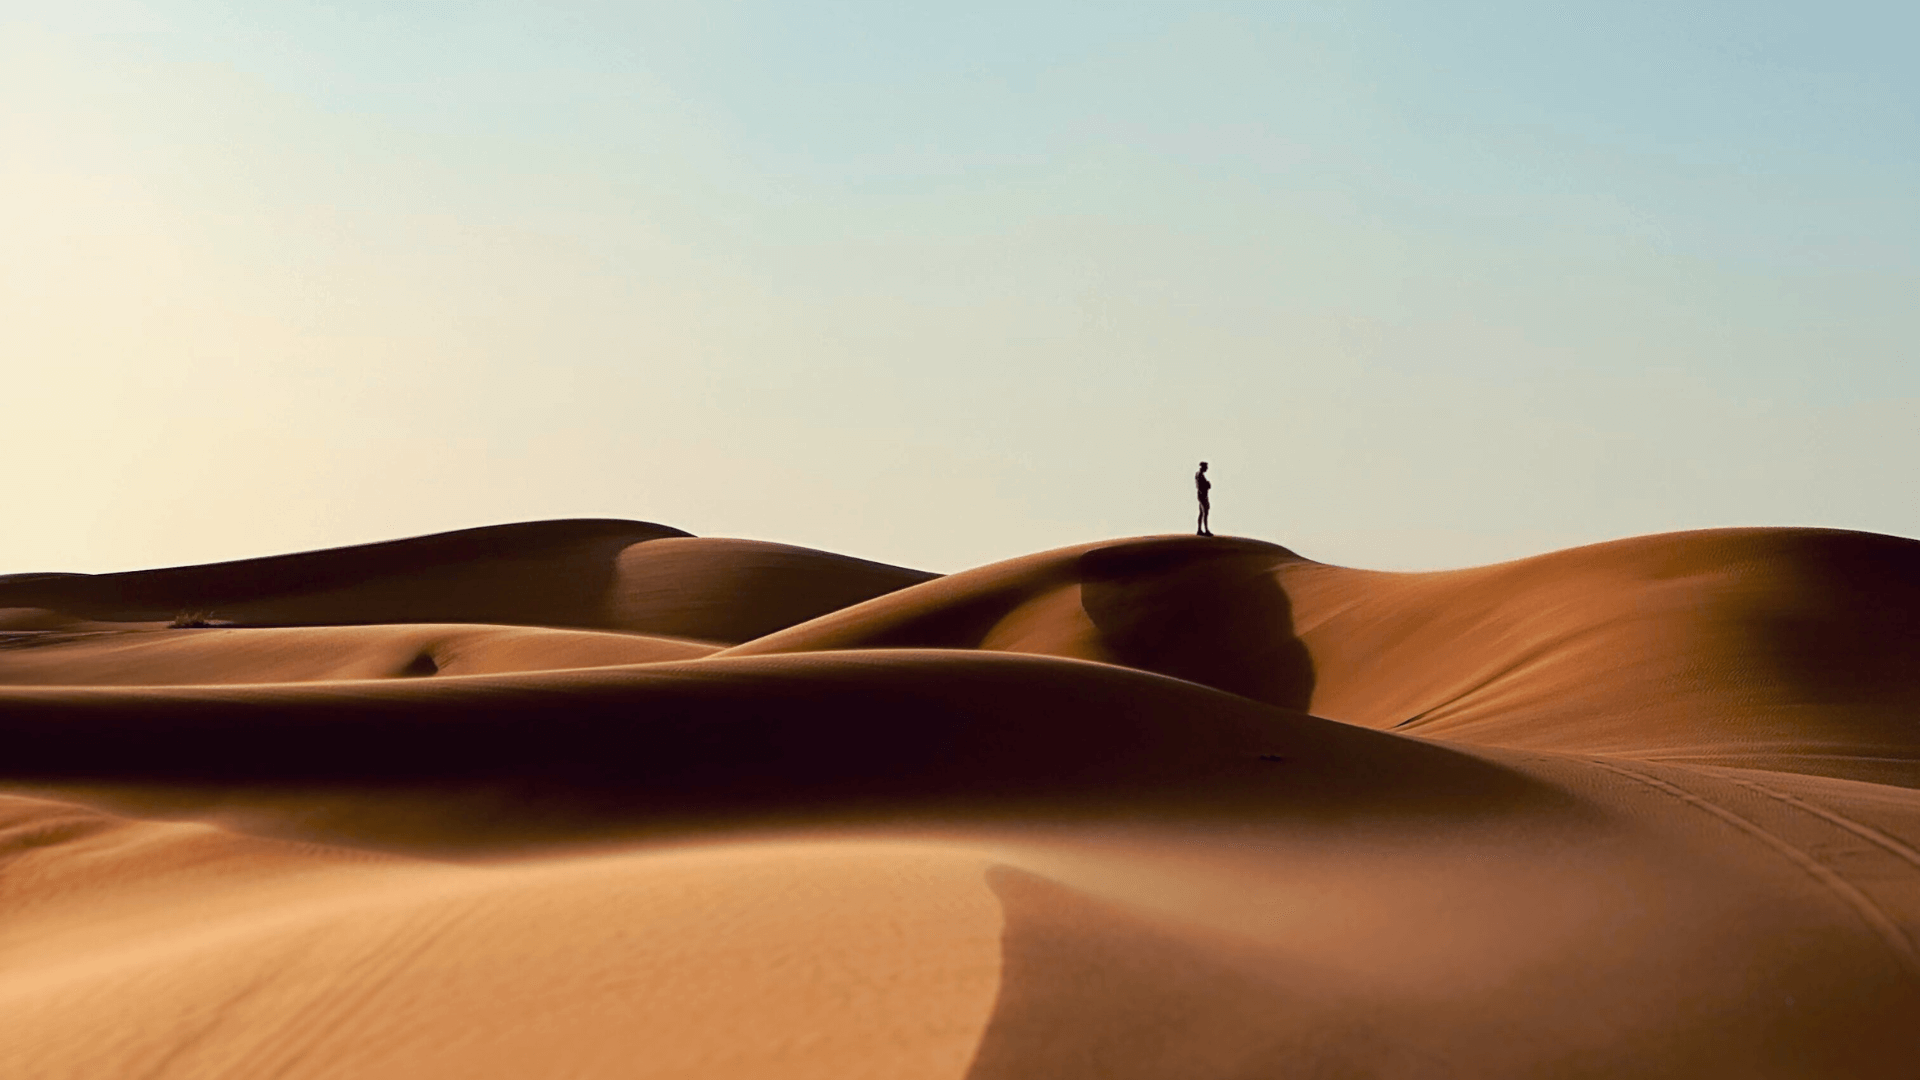 Featured image for “4 Day Luxury Excursion from Marrakech to Merzouga”